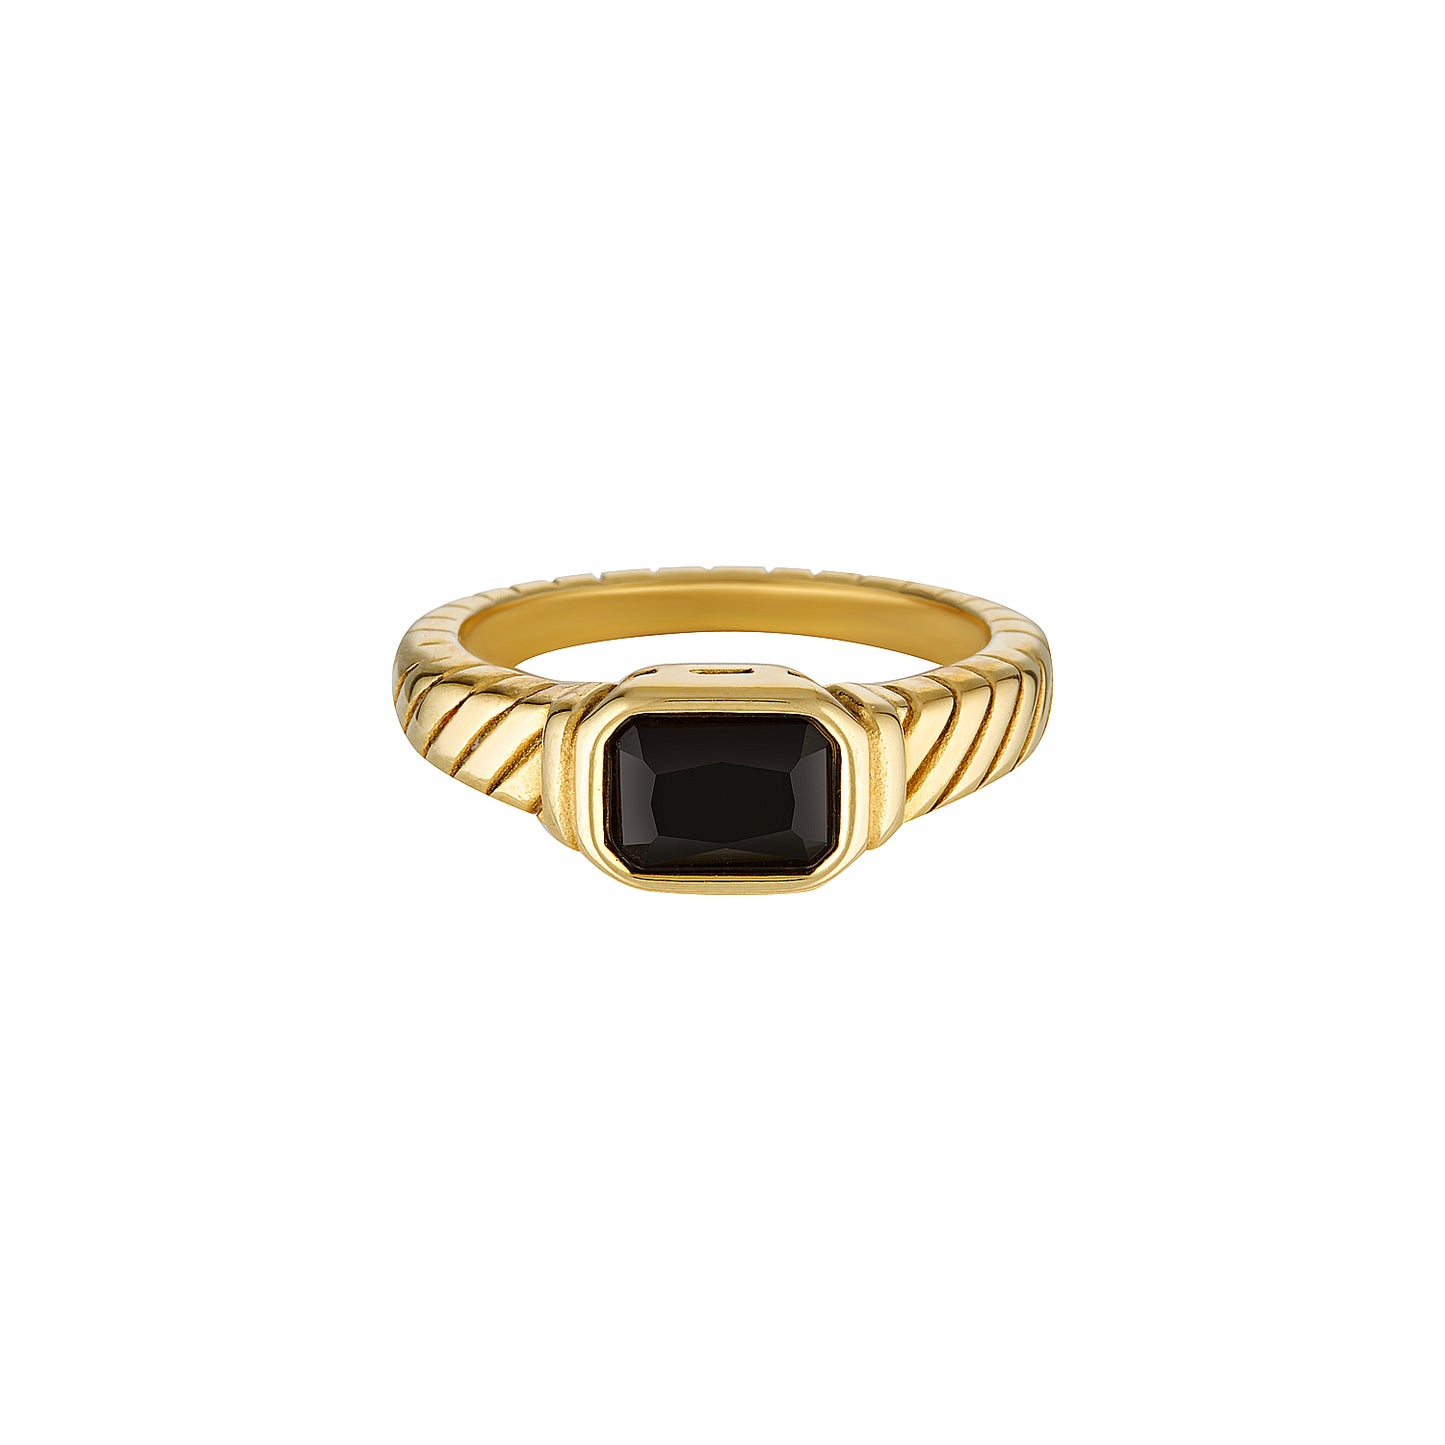 Clarence Gold and Black Signet Ring